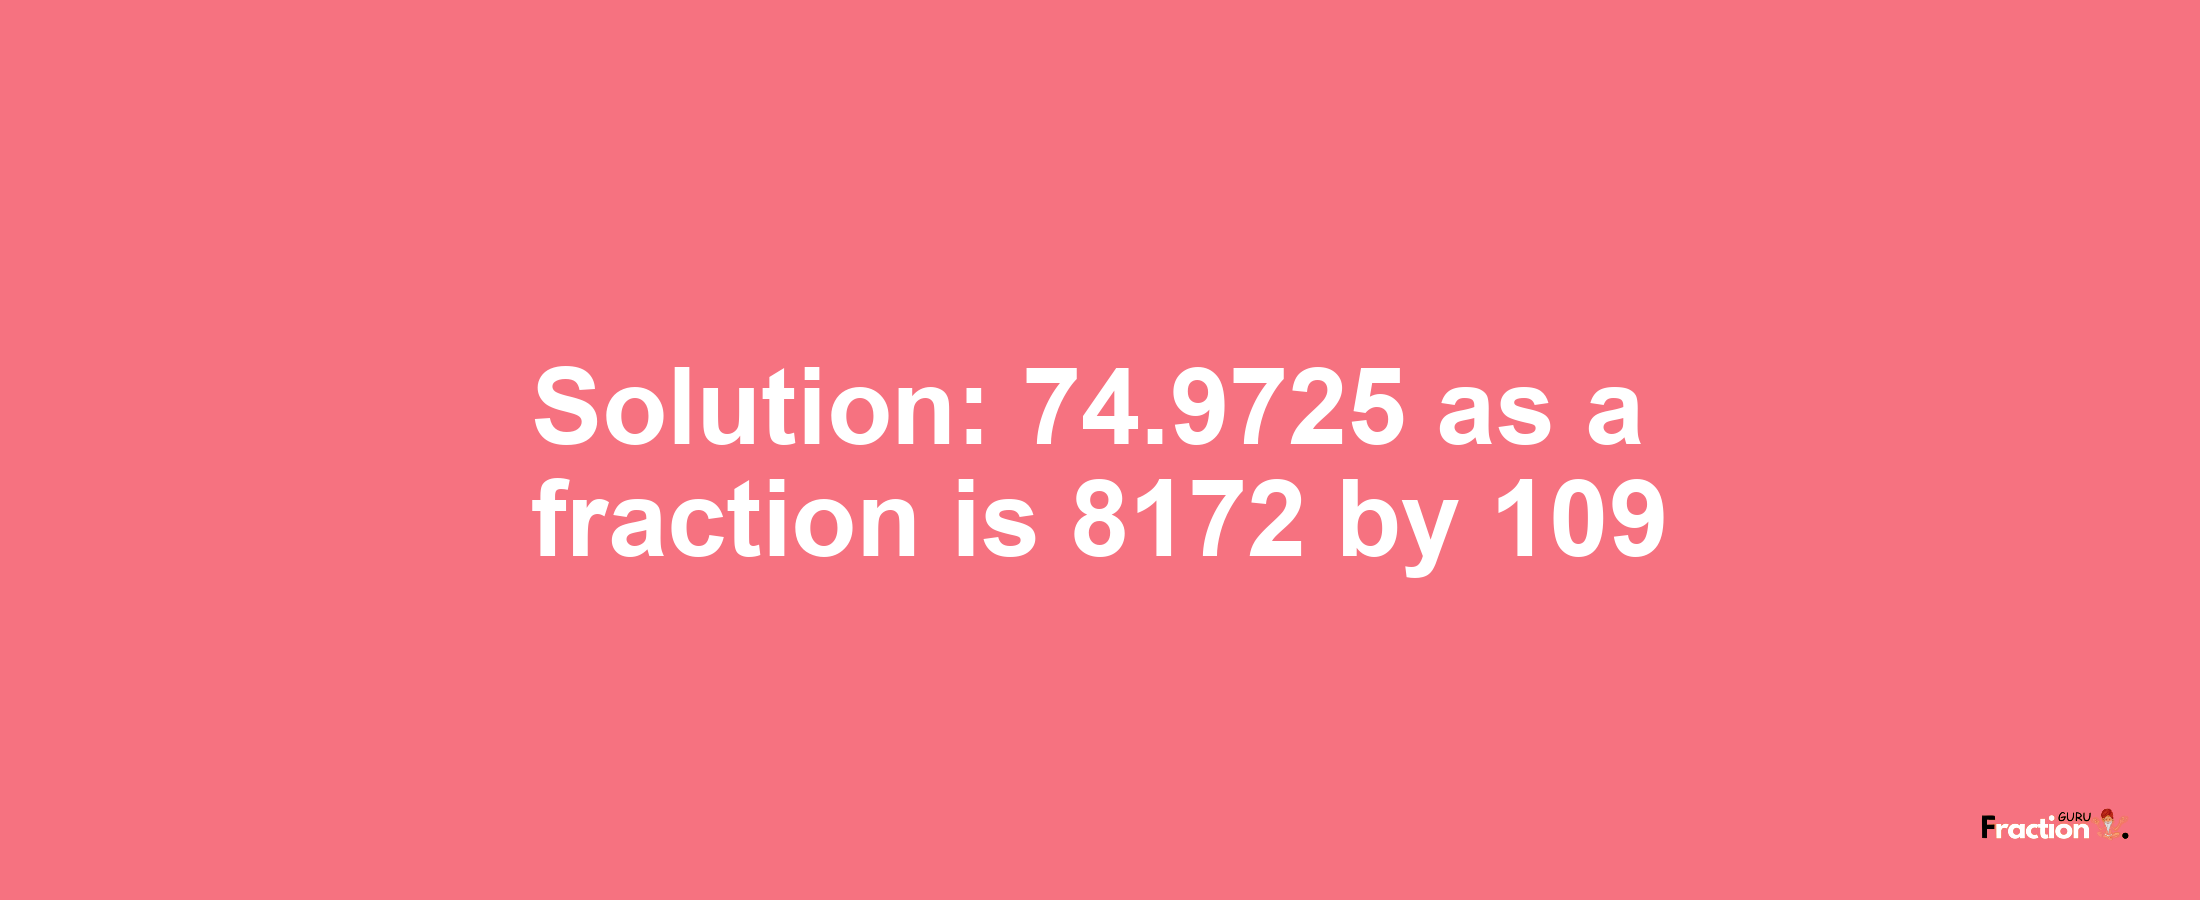 Solution:74.9725 as a fraction is 8172/109